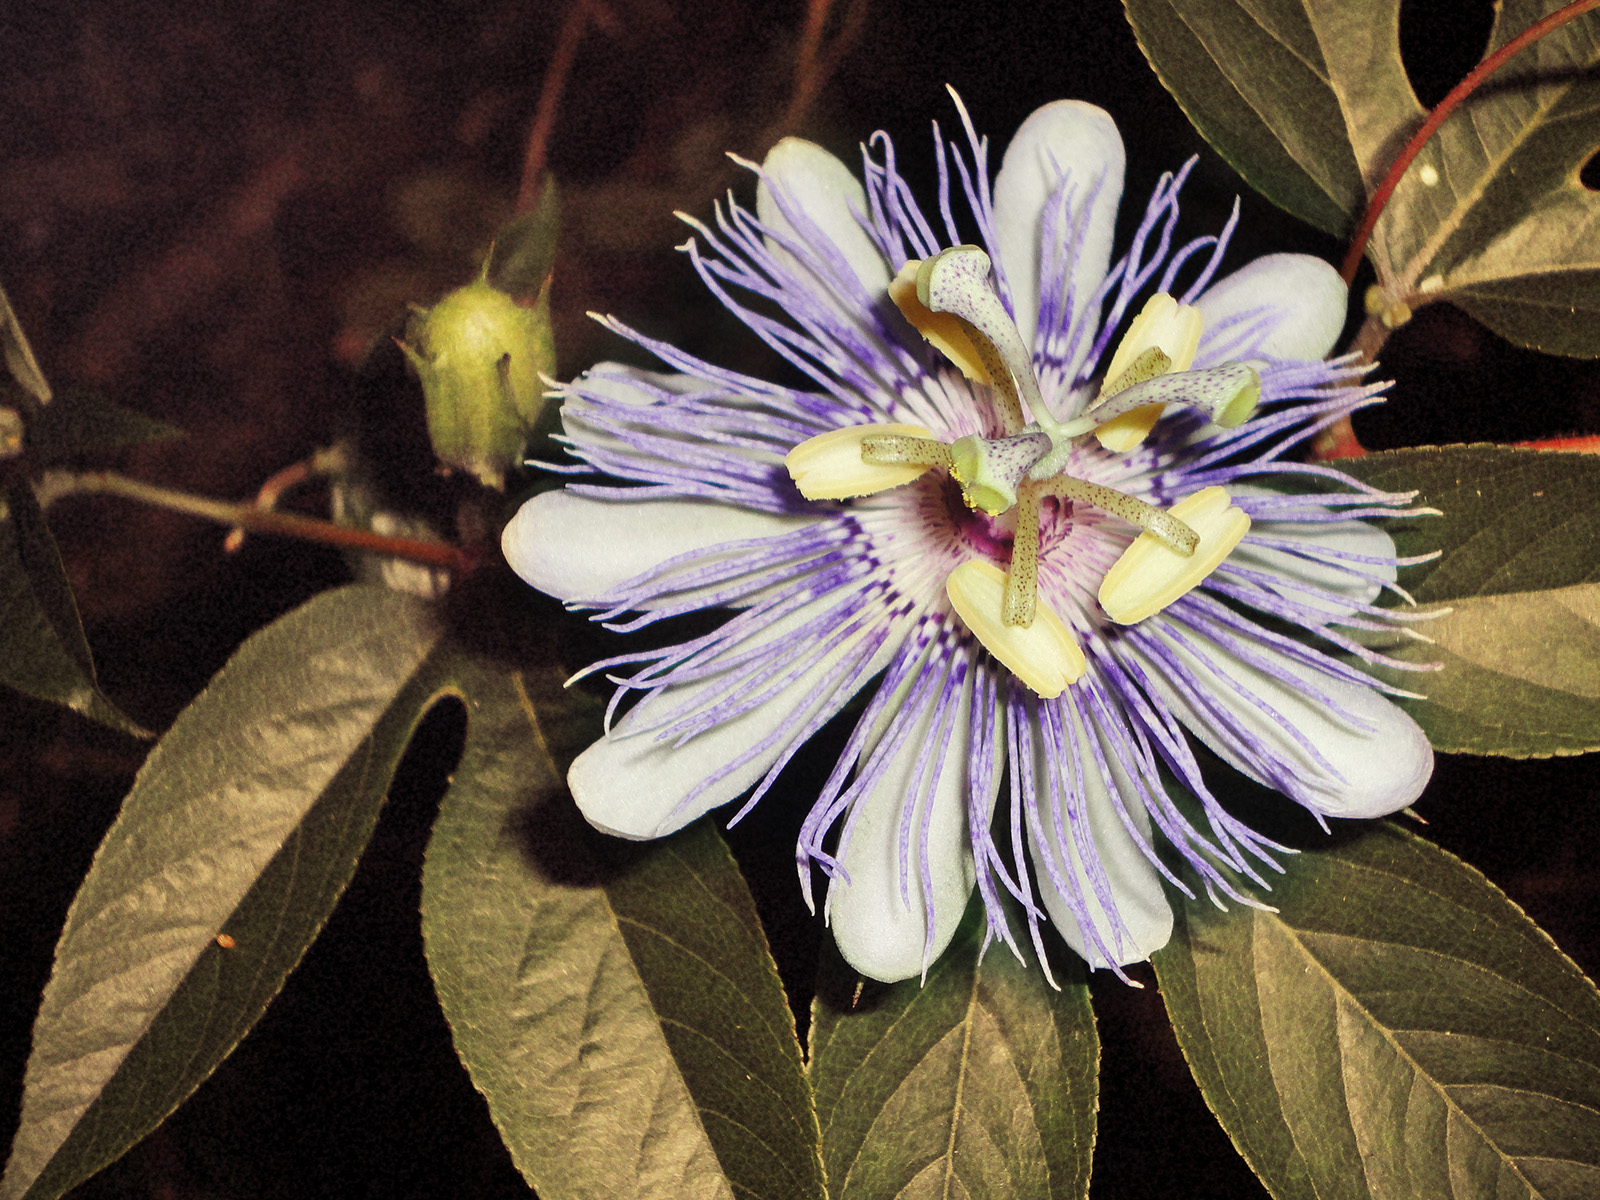 A medicinal Passionflower plant used to compare to the health benefits of Cannabis